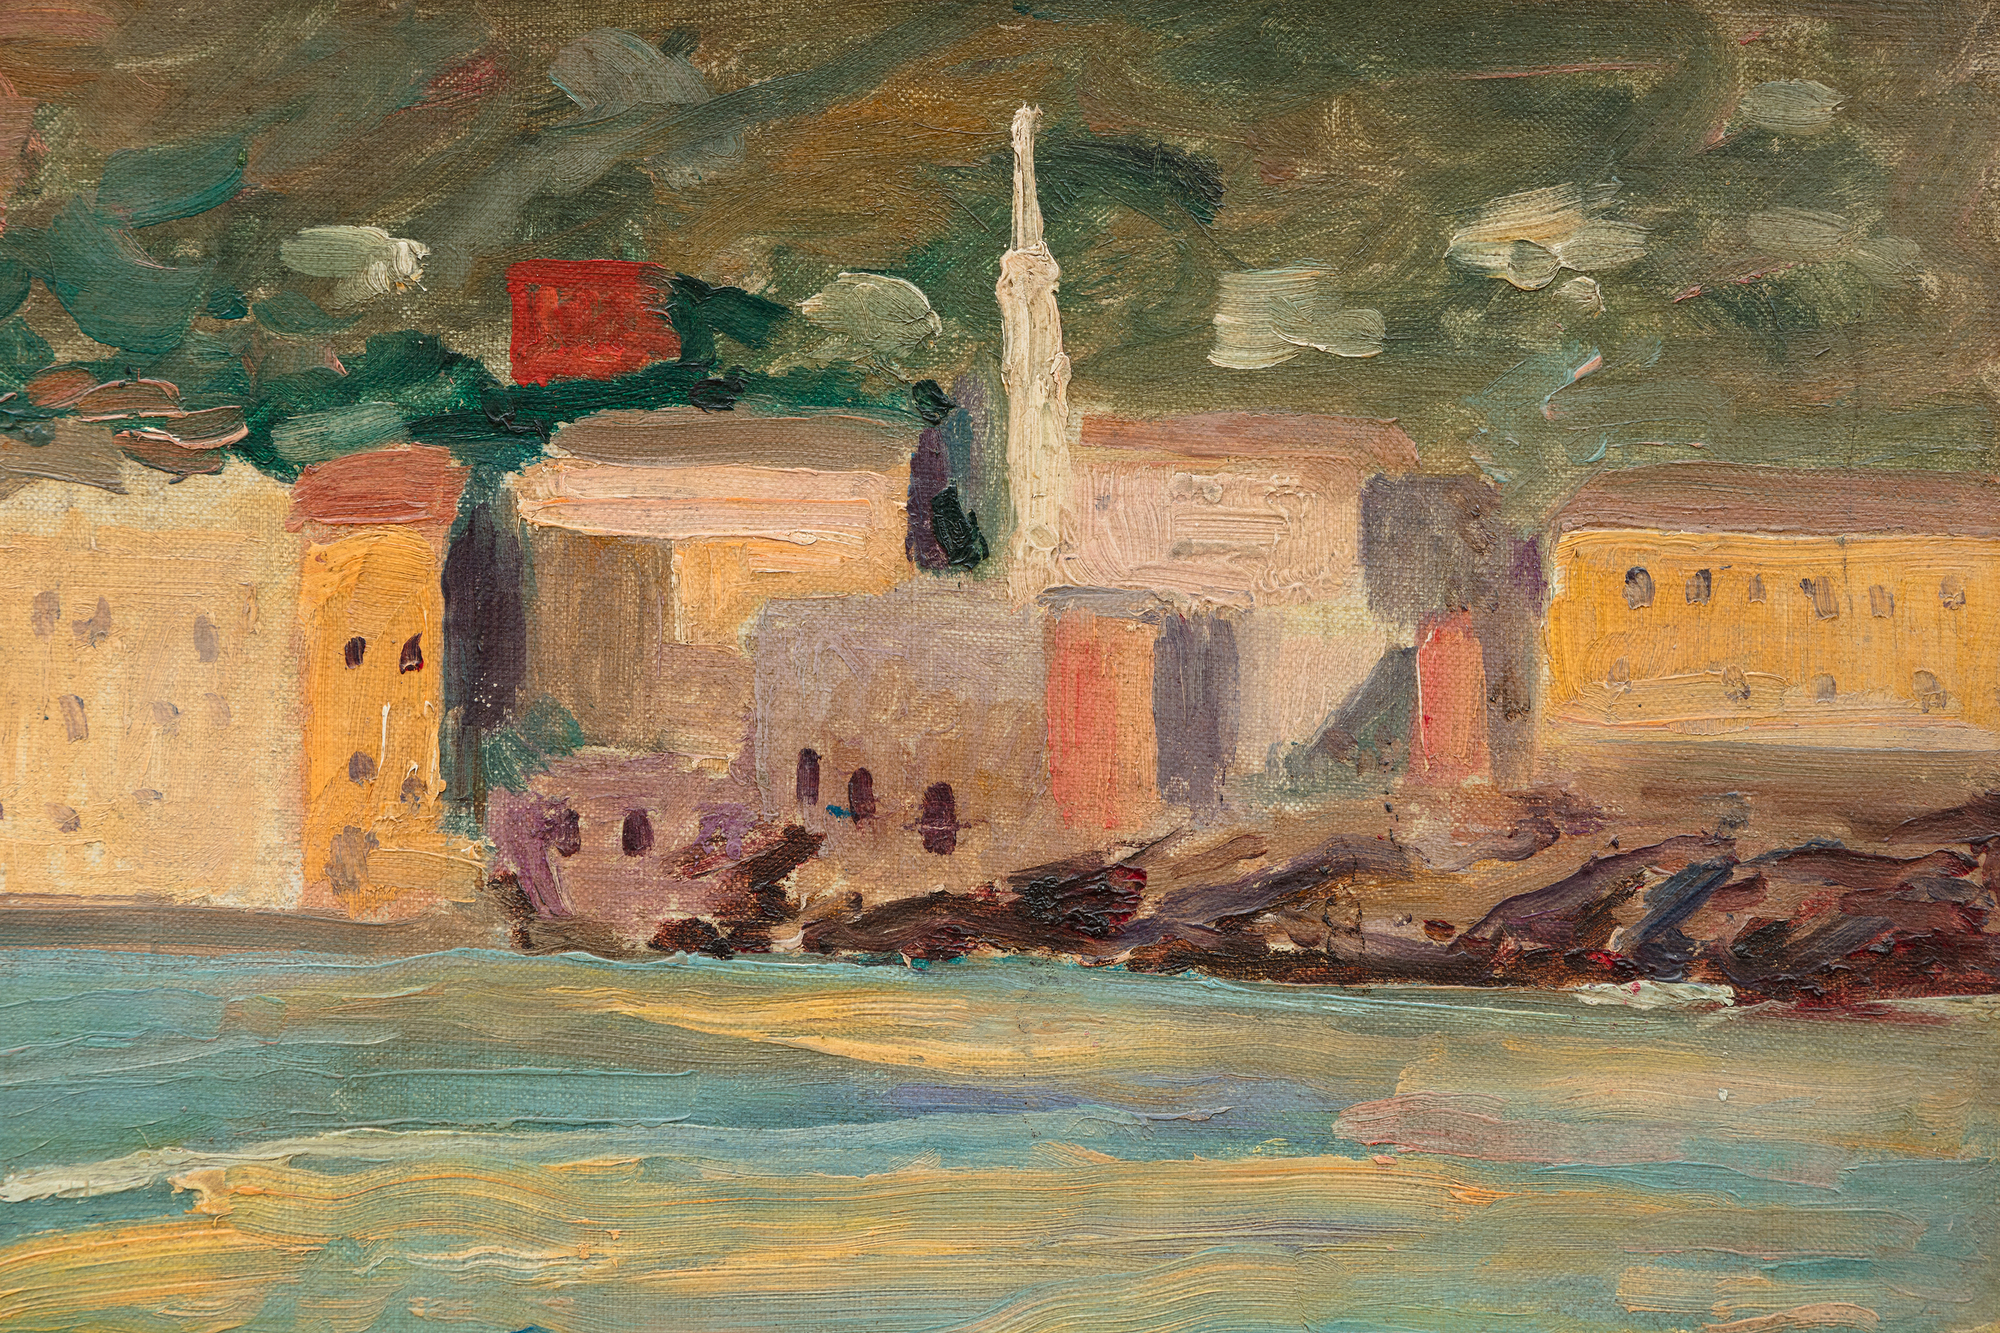 Uniquely among Winston Churchill’s known work, “Coastal Town on the Riviera” is in fact a double painting with the landscape on one side and an oil sketch on the other. The portrait sketch bears some resemblance to Viscountess Castlerosse who was a frequent guest in the same Rivera estates where Churchill visited. Churchill painted her in C 517 and C 518 and gives us a larger picture of the people who inhabited his world. 
<br>
<br>Of his approximately 550 works, the largest portion (about 150) were of the South of France, where Churchill could indulge in both the array of colors to apply to his canvas and in gambling, given the proximity of Monte Carlo.